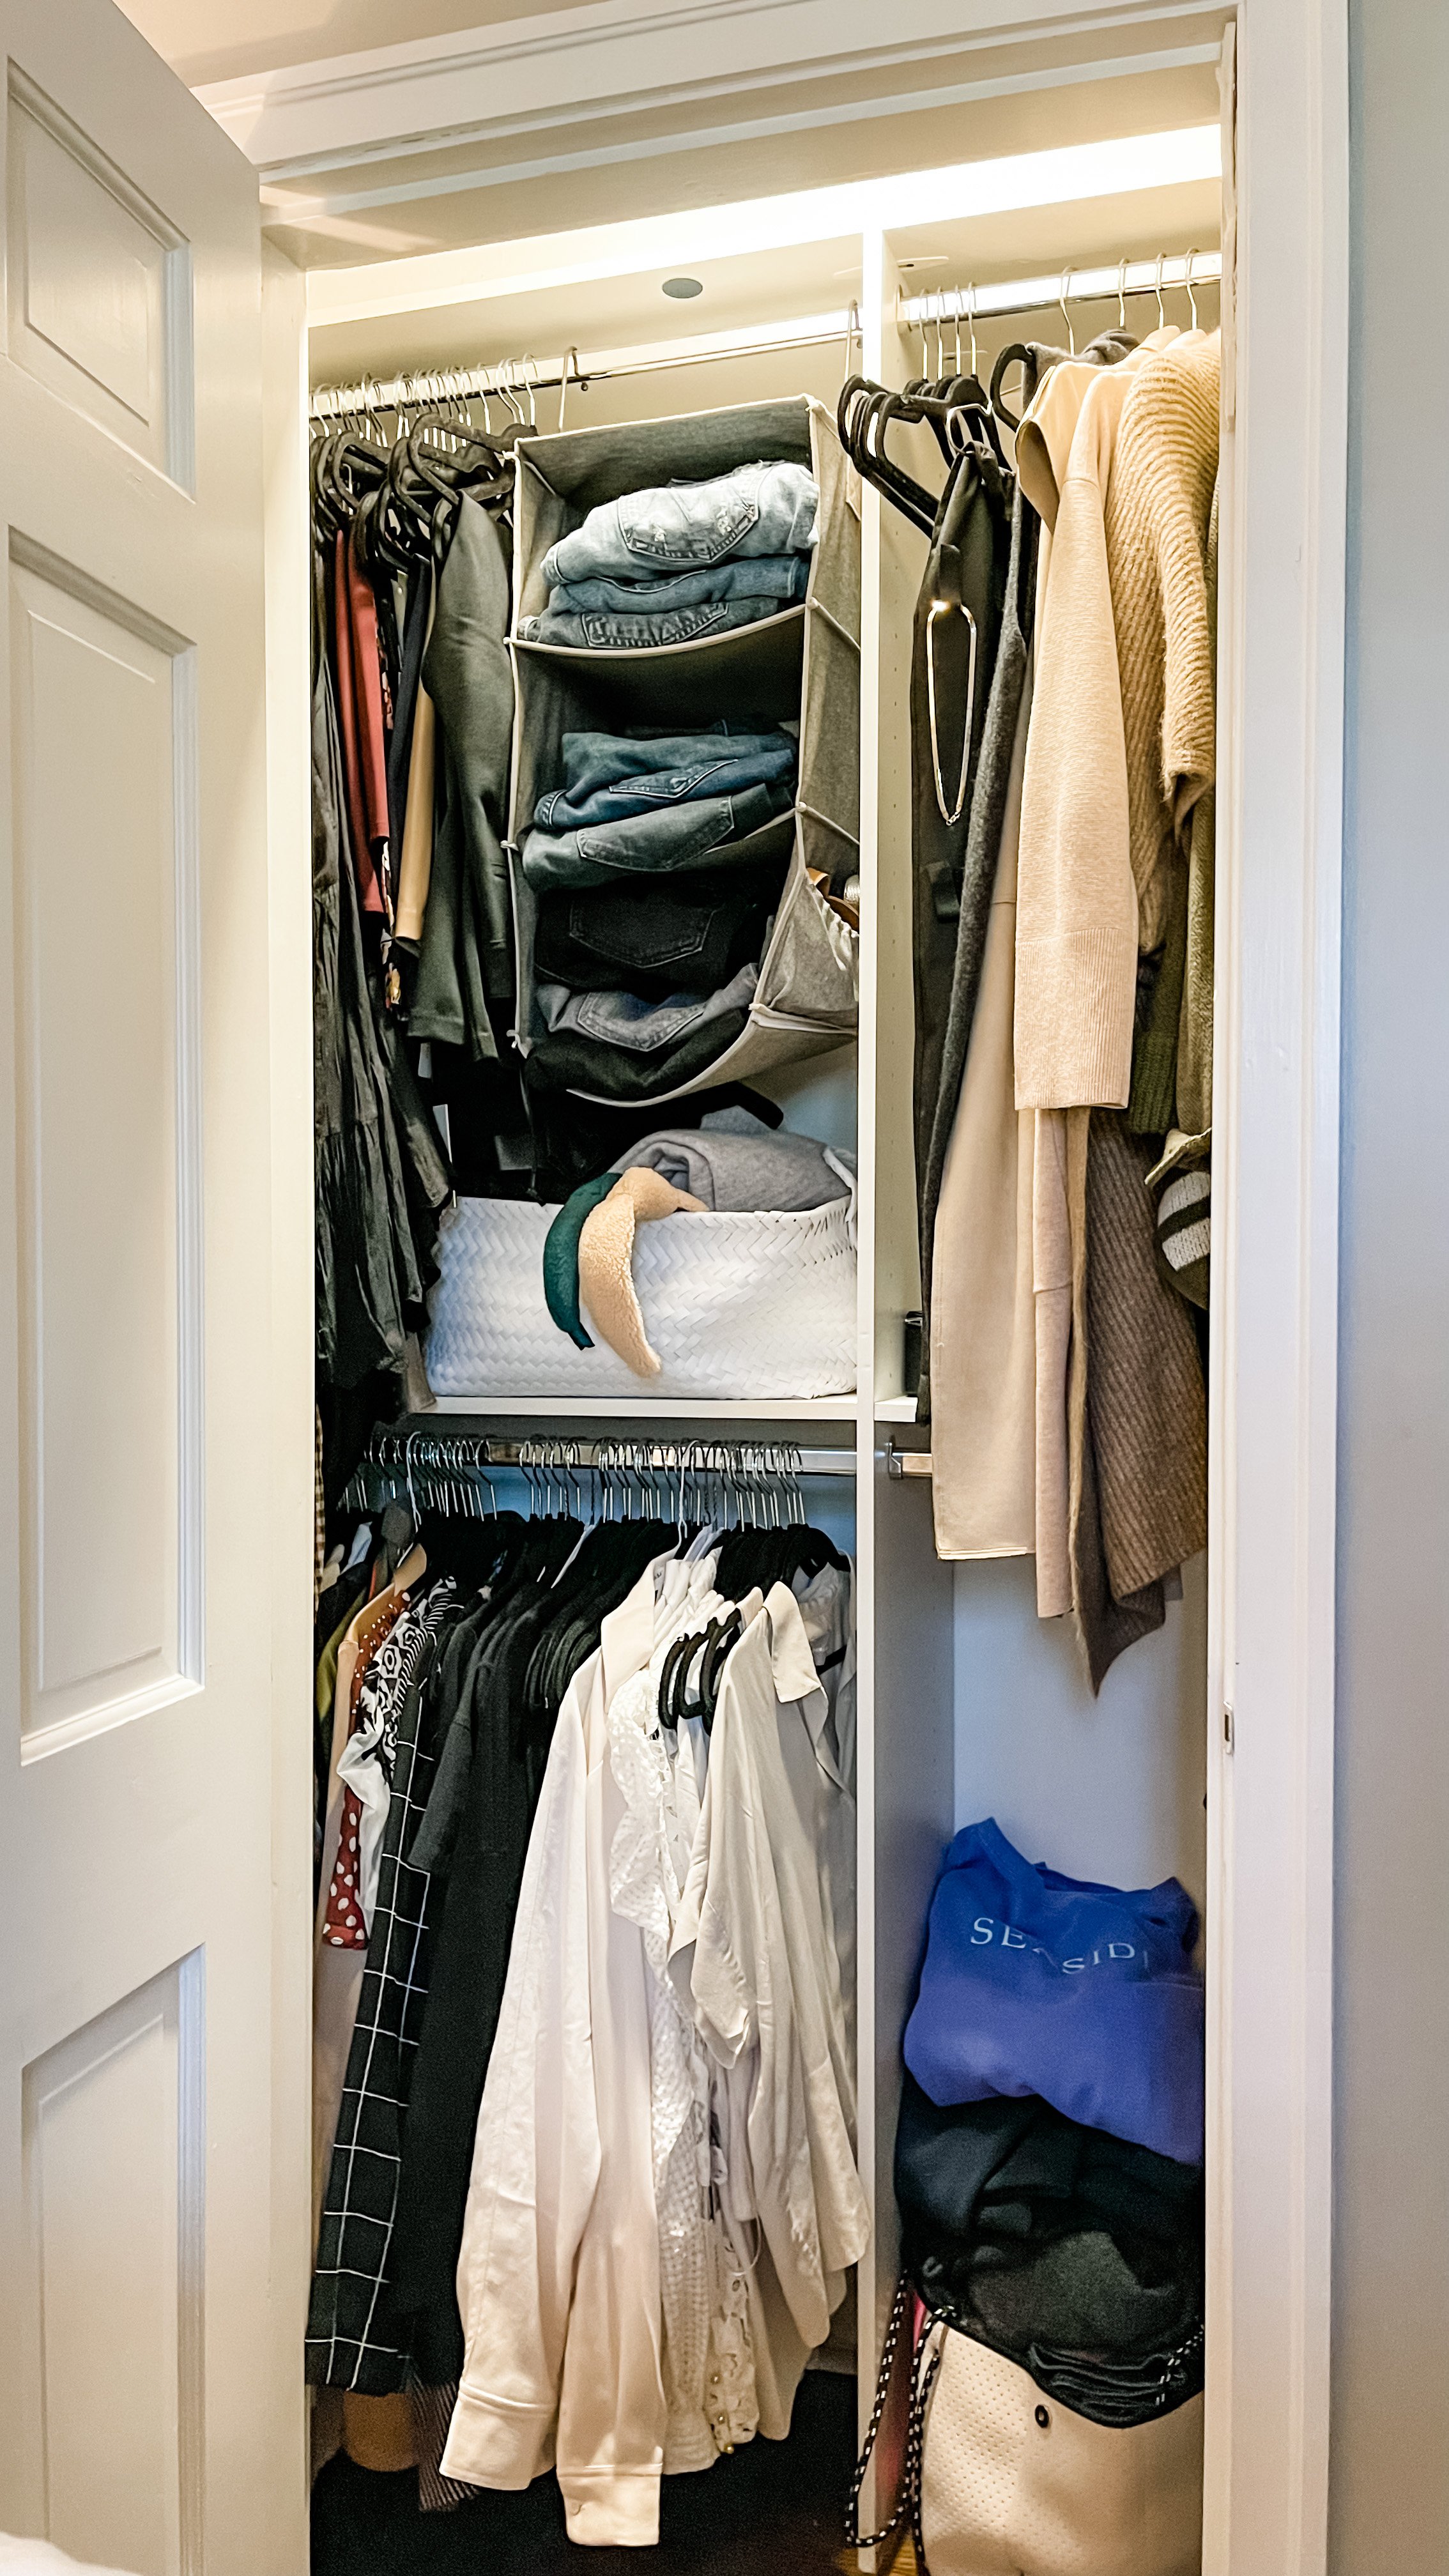 Maximizing a small reach-in closet where every inch counts